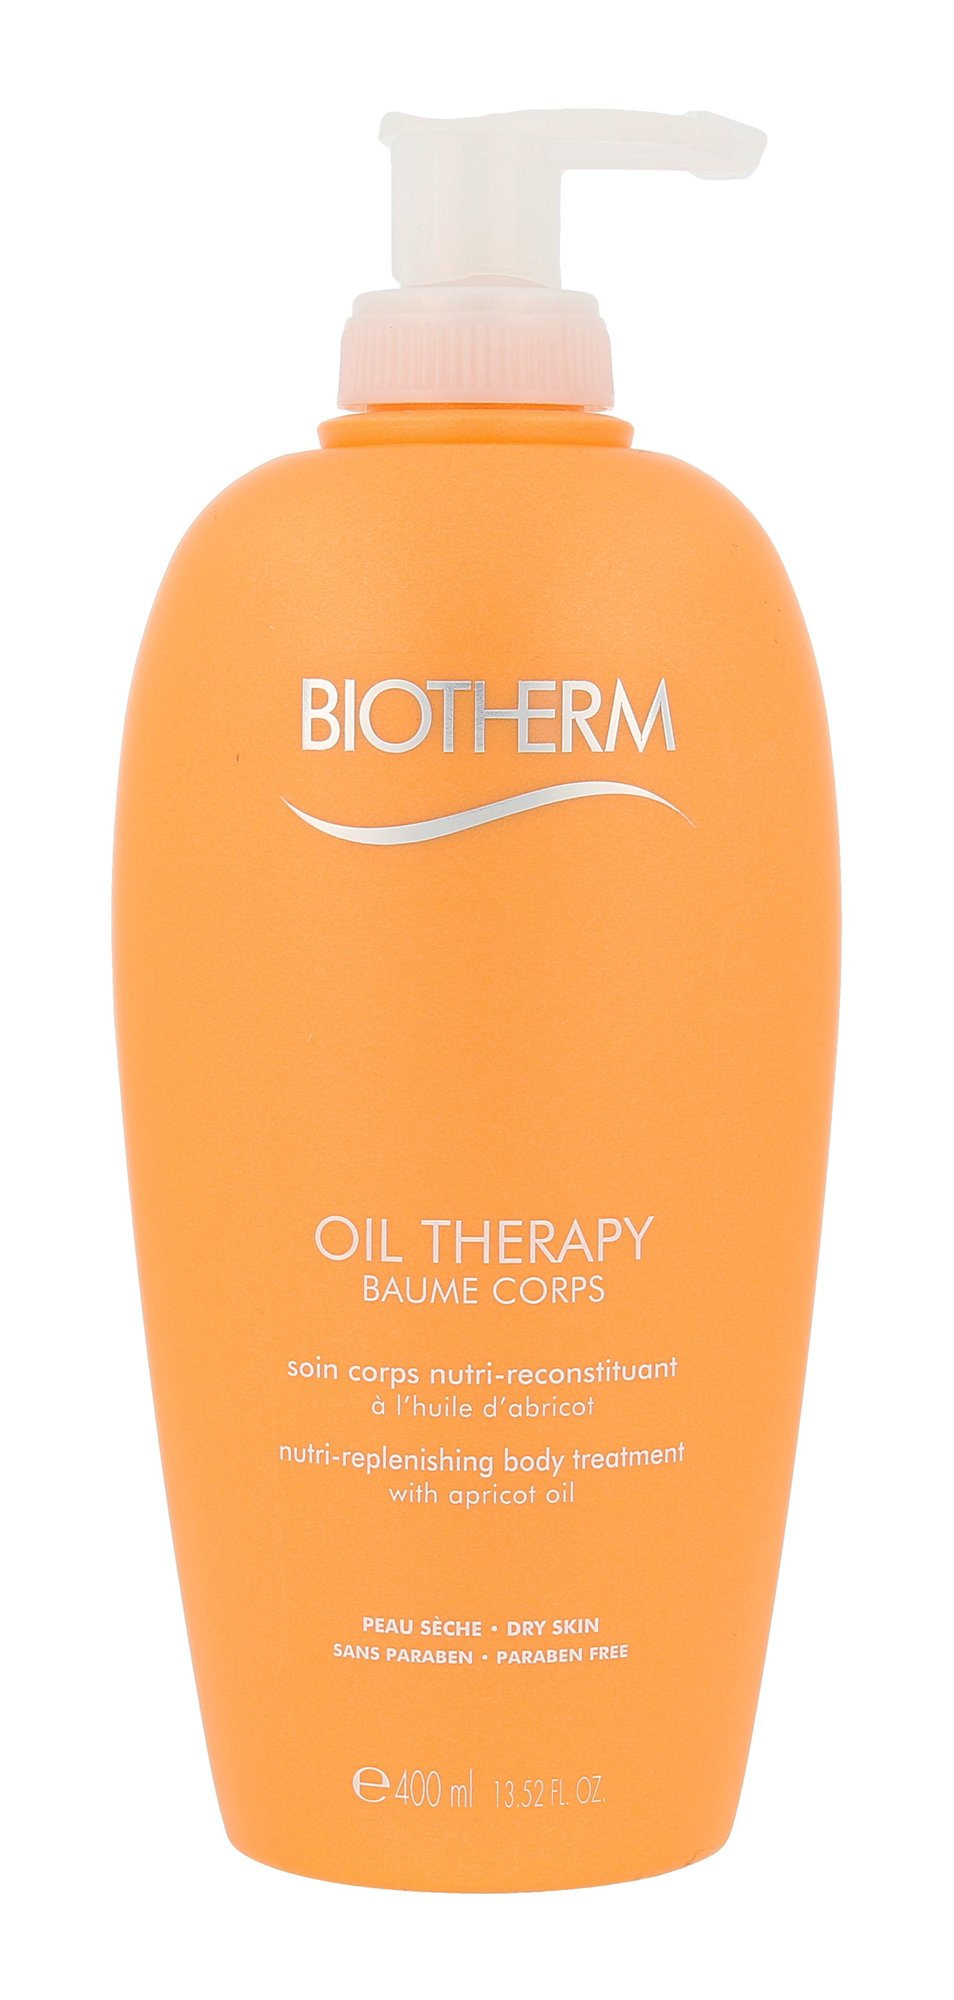 Biotherm Baume Corps Intensive Body Treatment